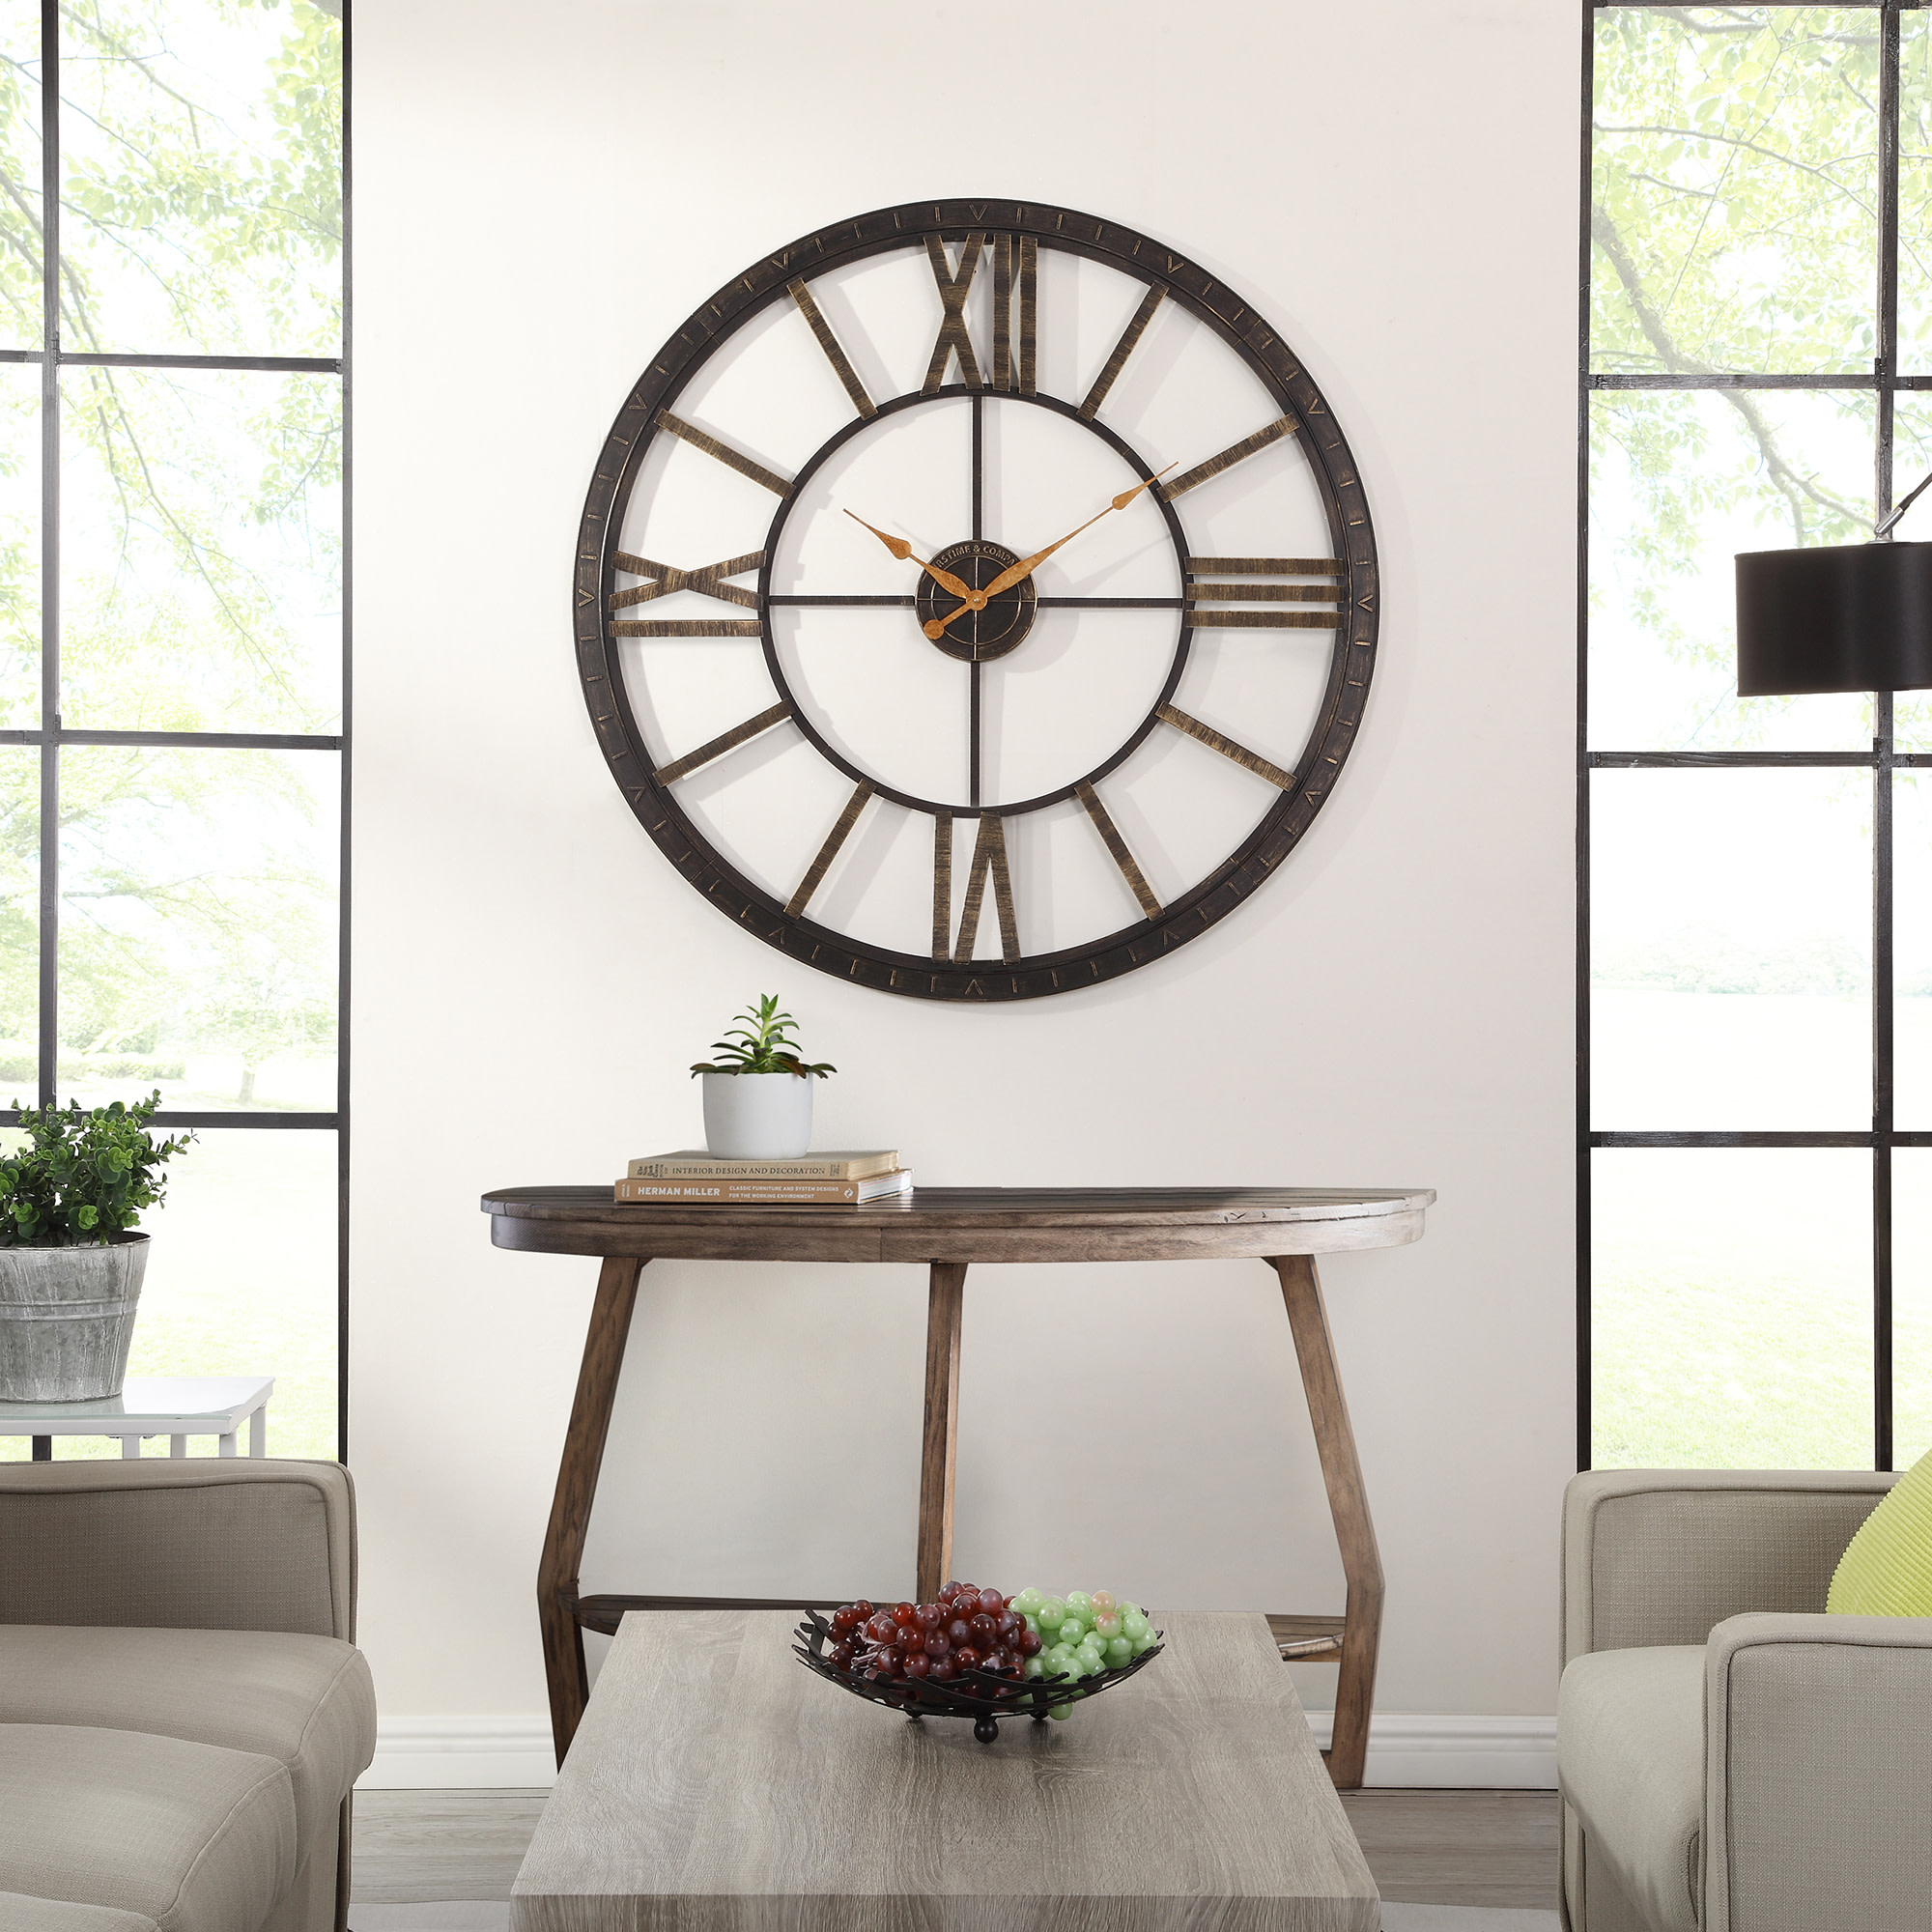 FirsTime & Co. Bronze Big Time Wall Clock, Modern, Analog, 40 x 2 x 40 in - image 3 of 8